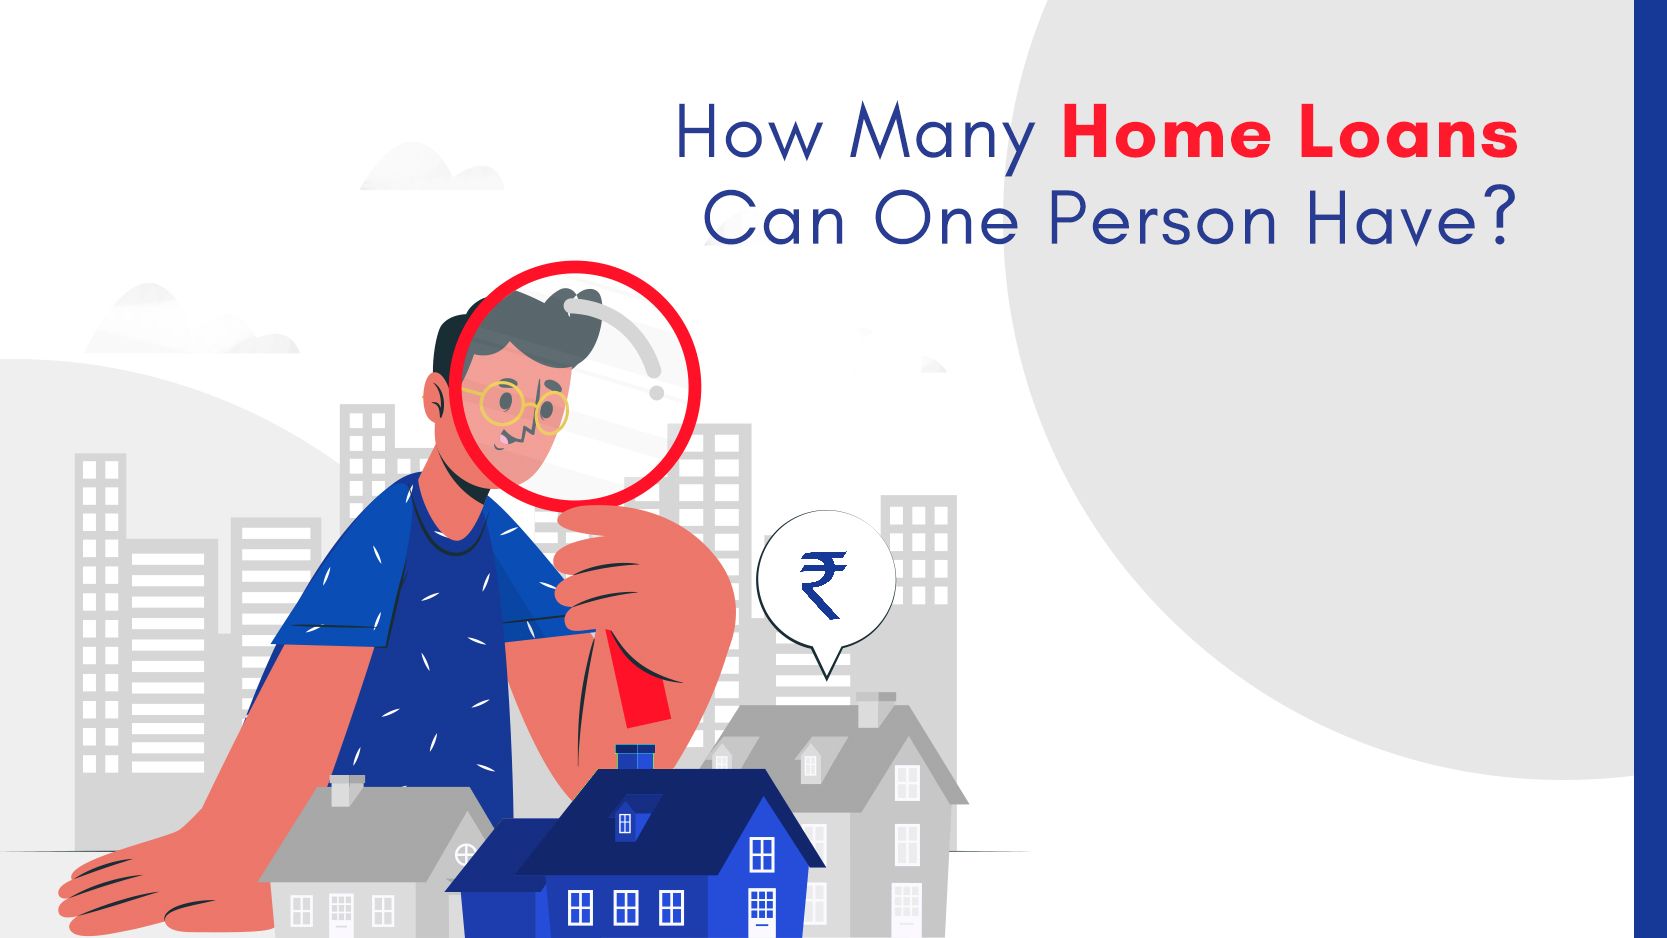 How Many Home Loans Can One Person Have?